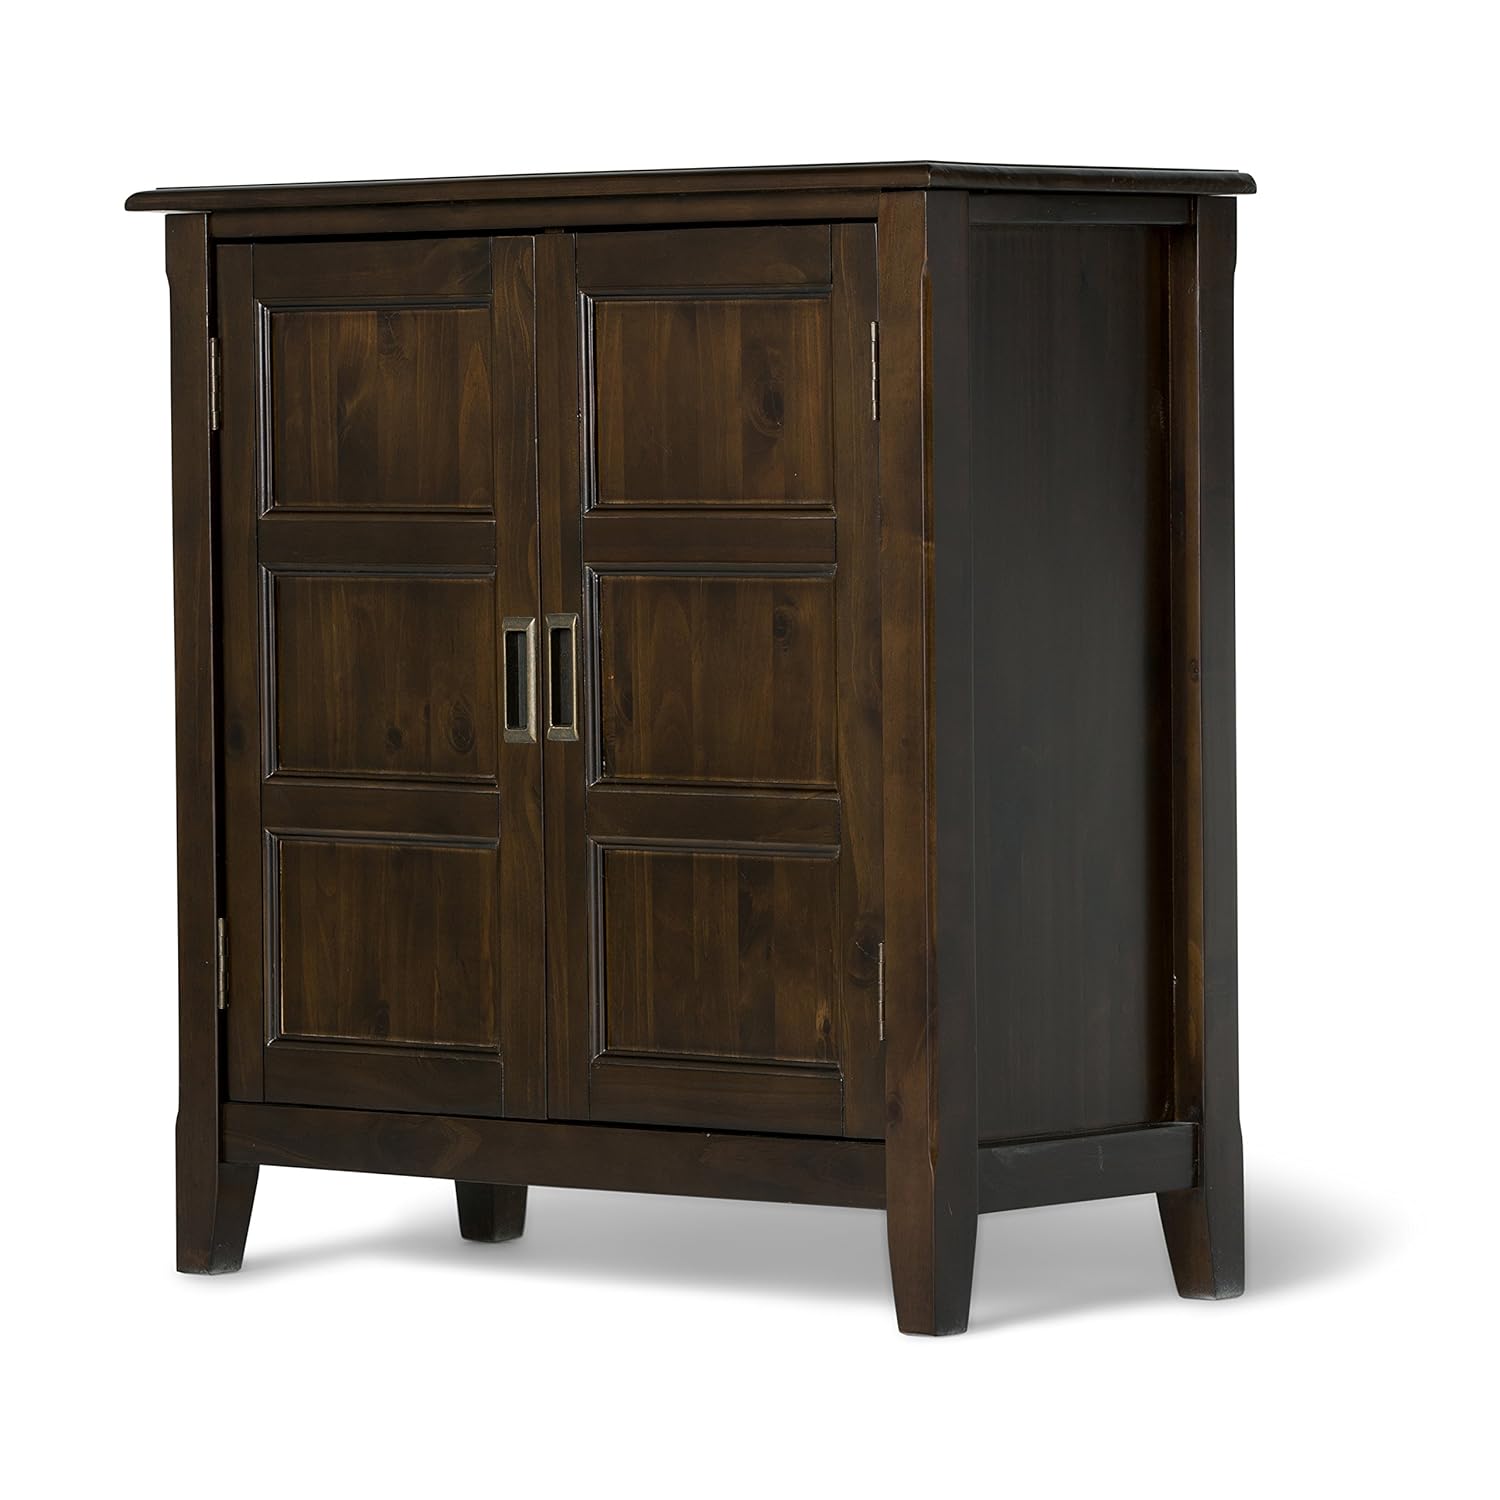 TKM Home Burlington Solid Wood 30 Inch Wide Traditional Low Storage Cabinet In Mahogany Brown, With 2 Doors, 2 Adjustable She…